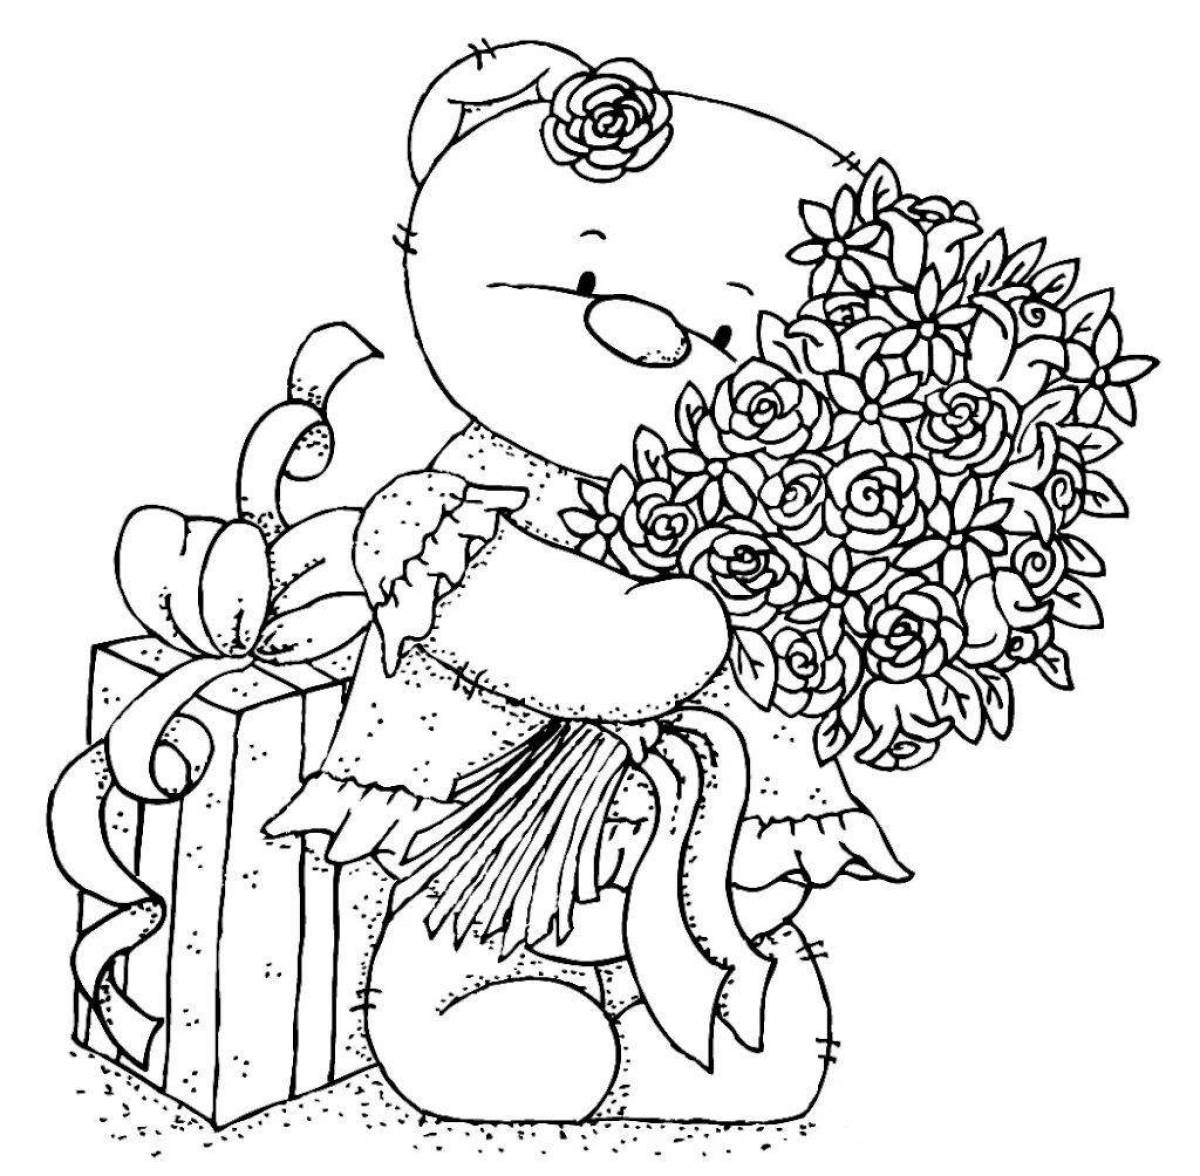 Lovely bear with flowers